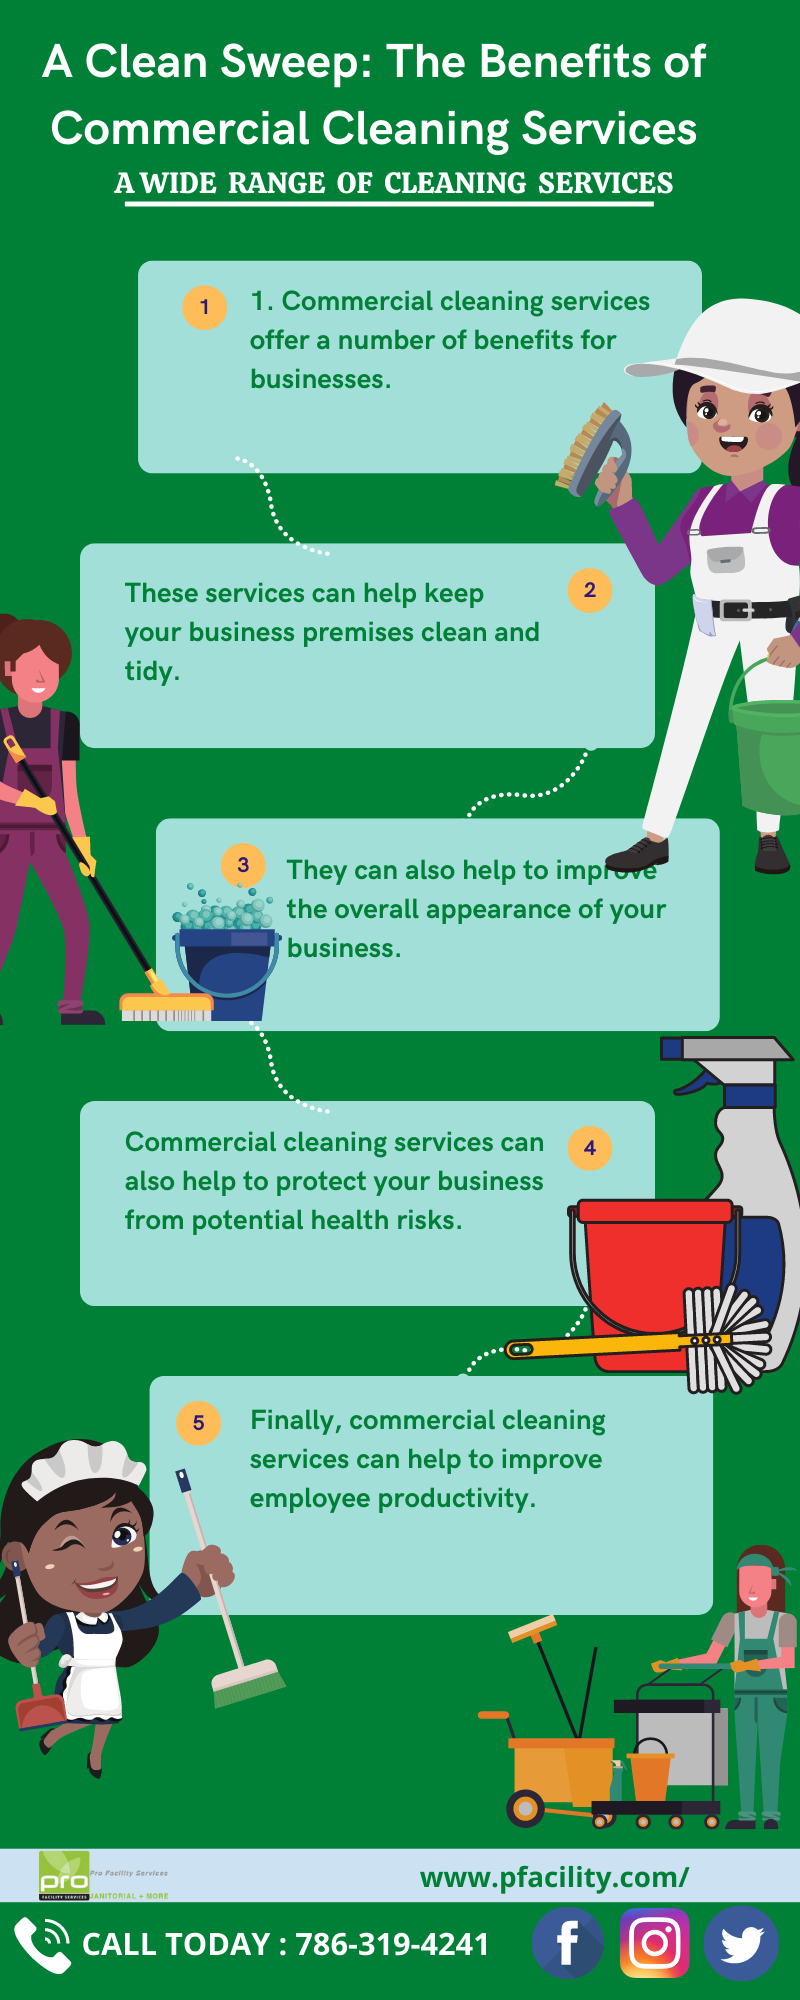 A Clean Sweep: The Benefits of Commercial Cleaning Services | by Pro  Facility | Medium